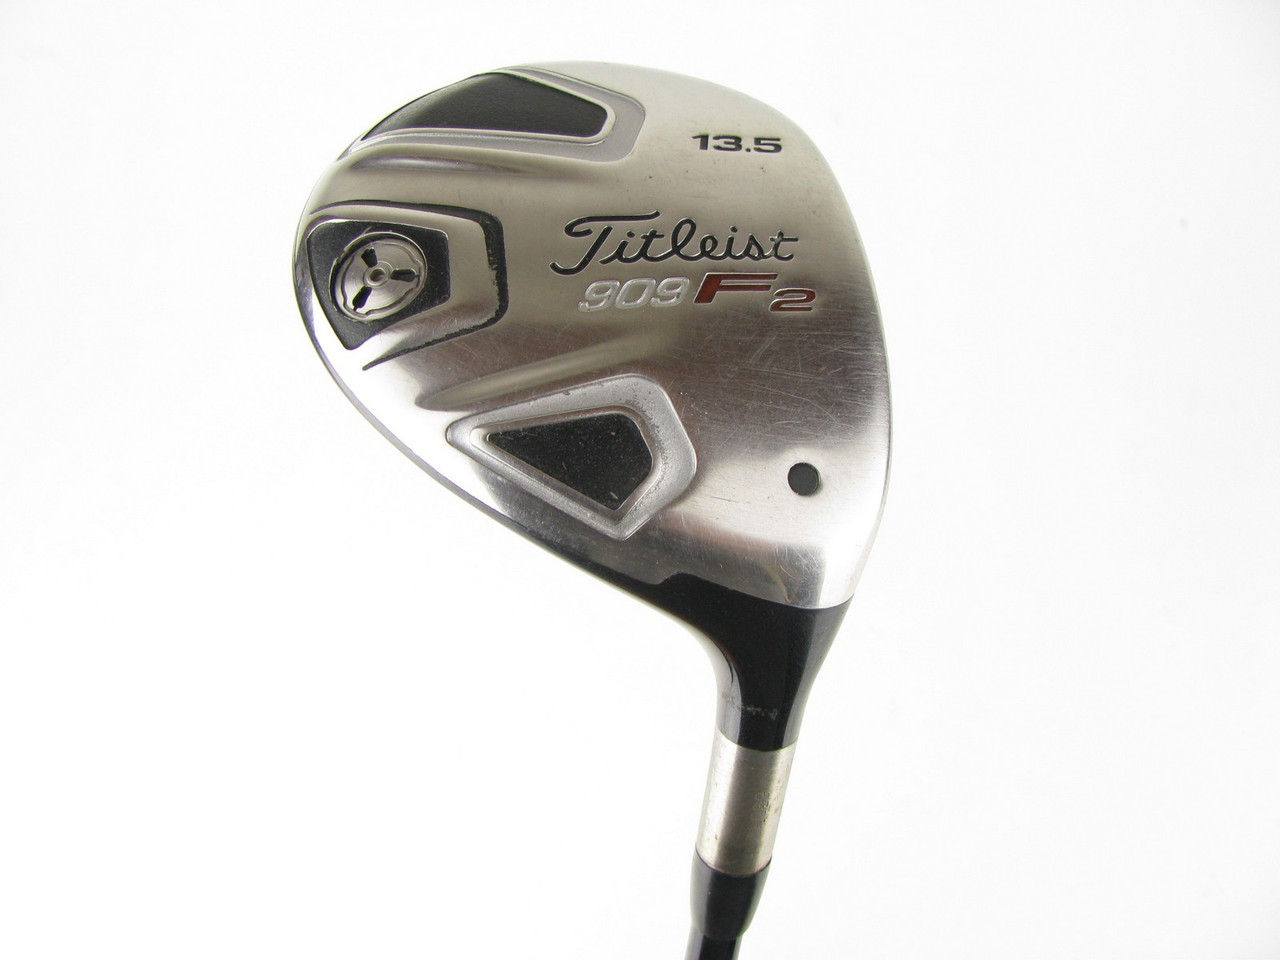 Titleist 909 F2 Fairway Wood 13.5 degree w/ Graphite Voodoo SVS6 Stiff (Out  of Stock) - Clubs n Covers Golf